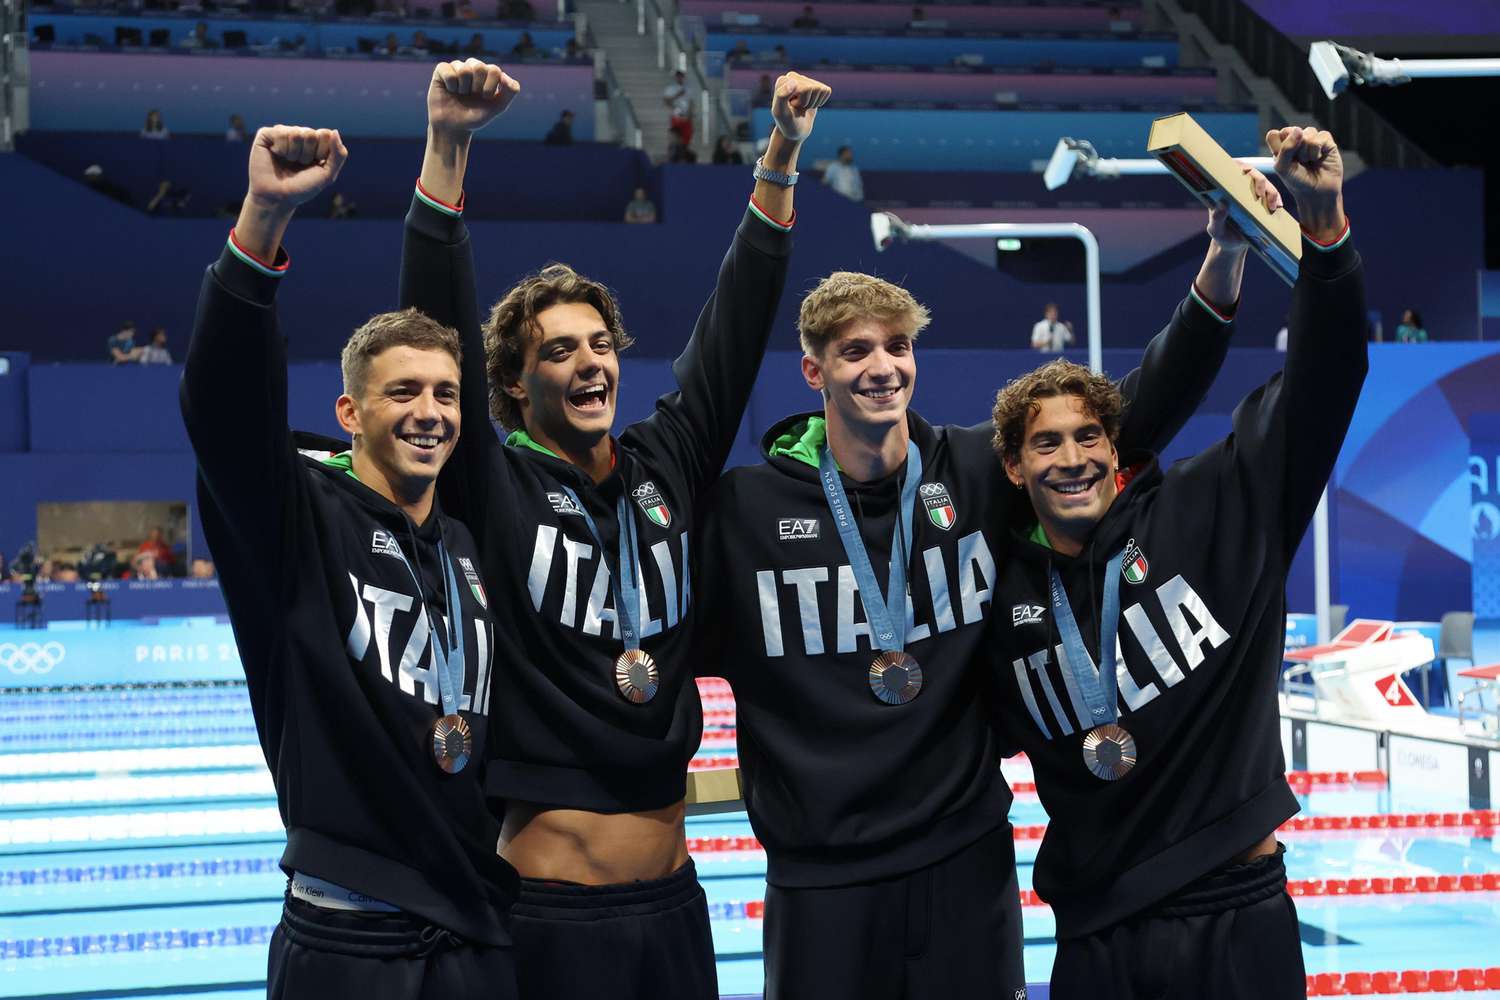 Italian Swimmer Bares Abs During Paris Olympics Medal Ceremony and Sets the Internet on Fire